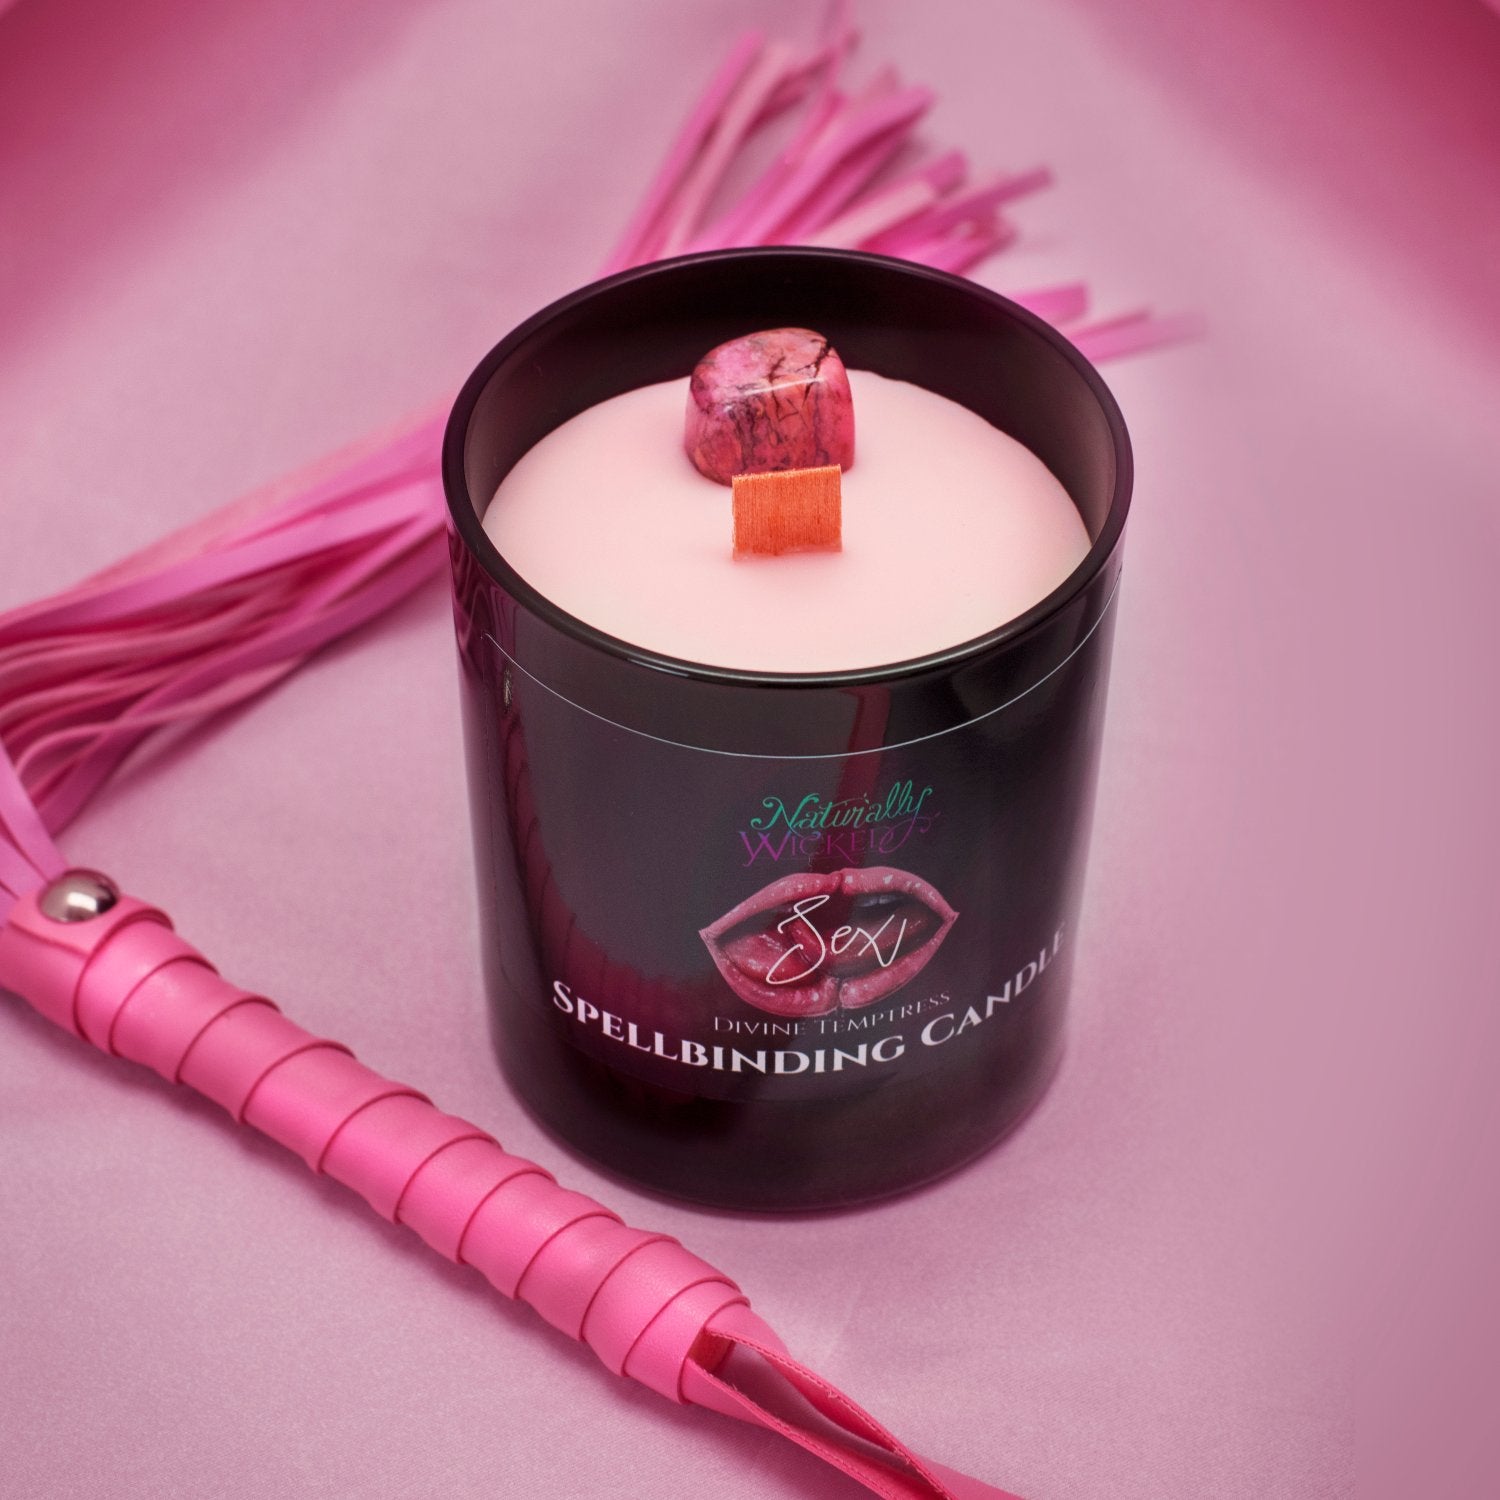 Naturally Wicked Spellbinding Sex Spell Candle Entombed With Rhodonite Crystal Sits Amongst Kinky Pink Whip